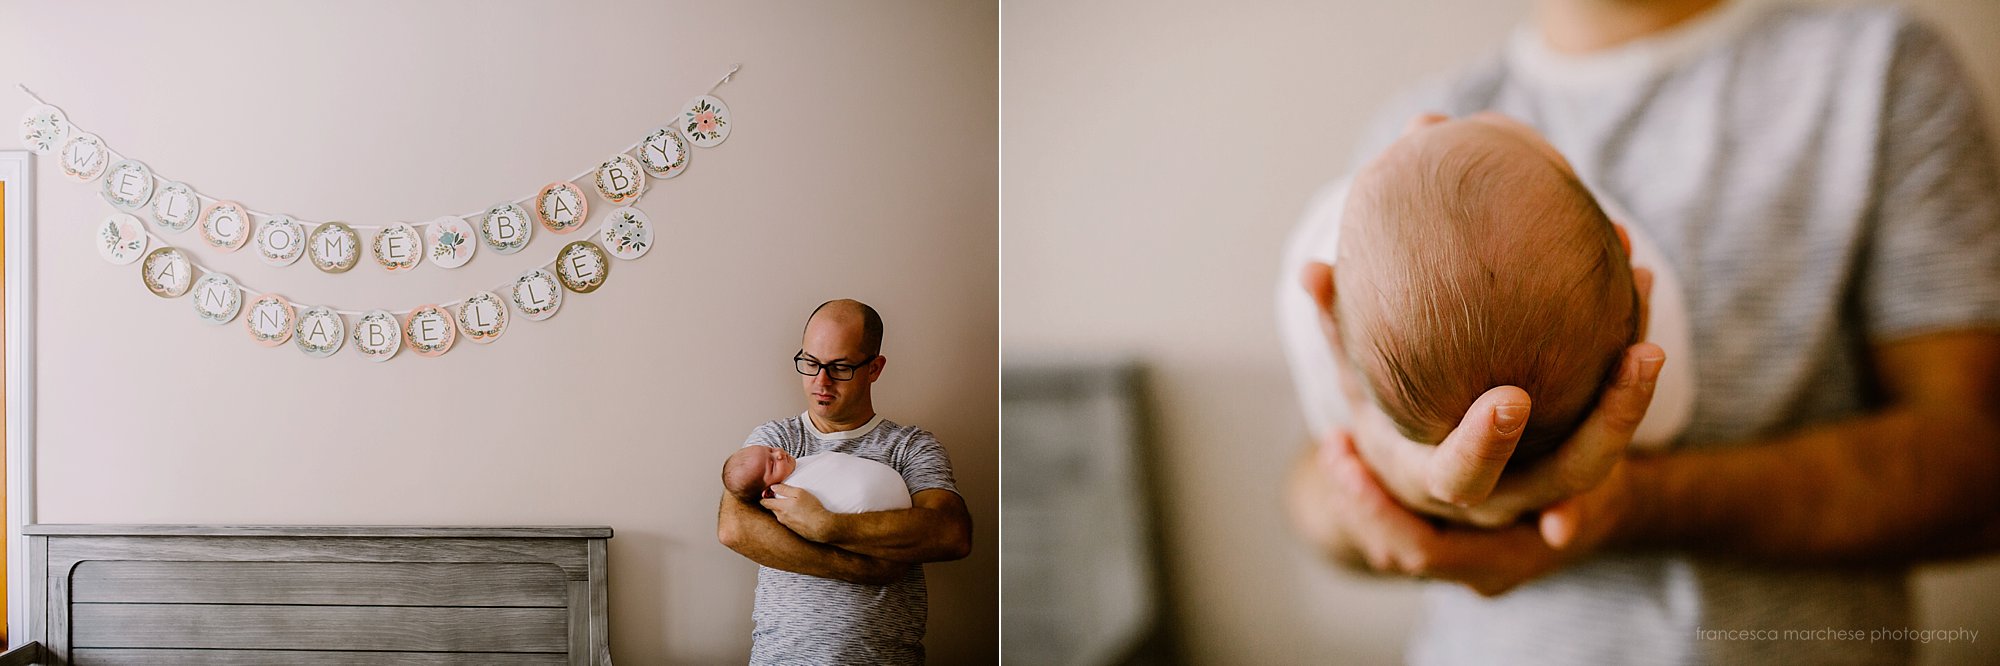 Francesca Marchese Photography lifestyle newborn photography session new father holding baby daughter in nursery